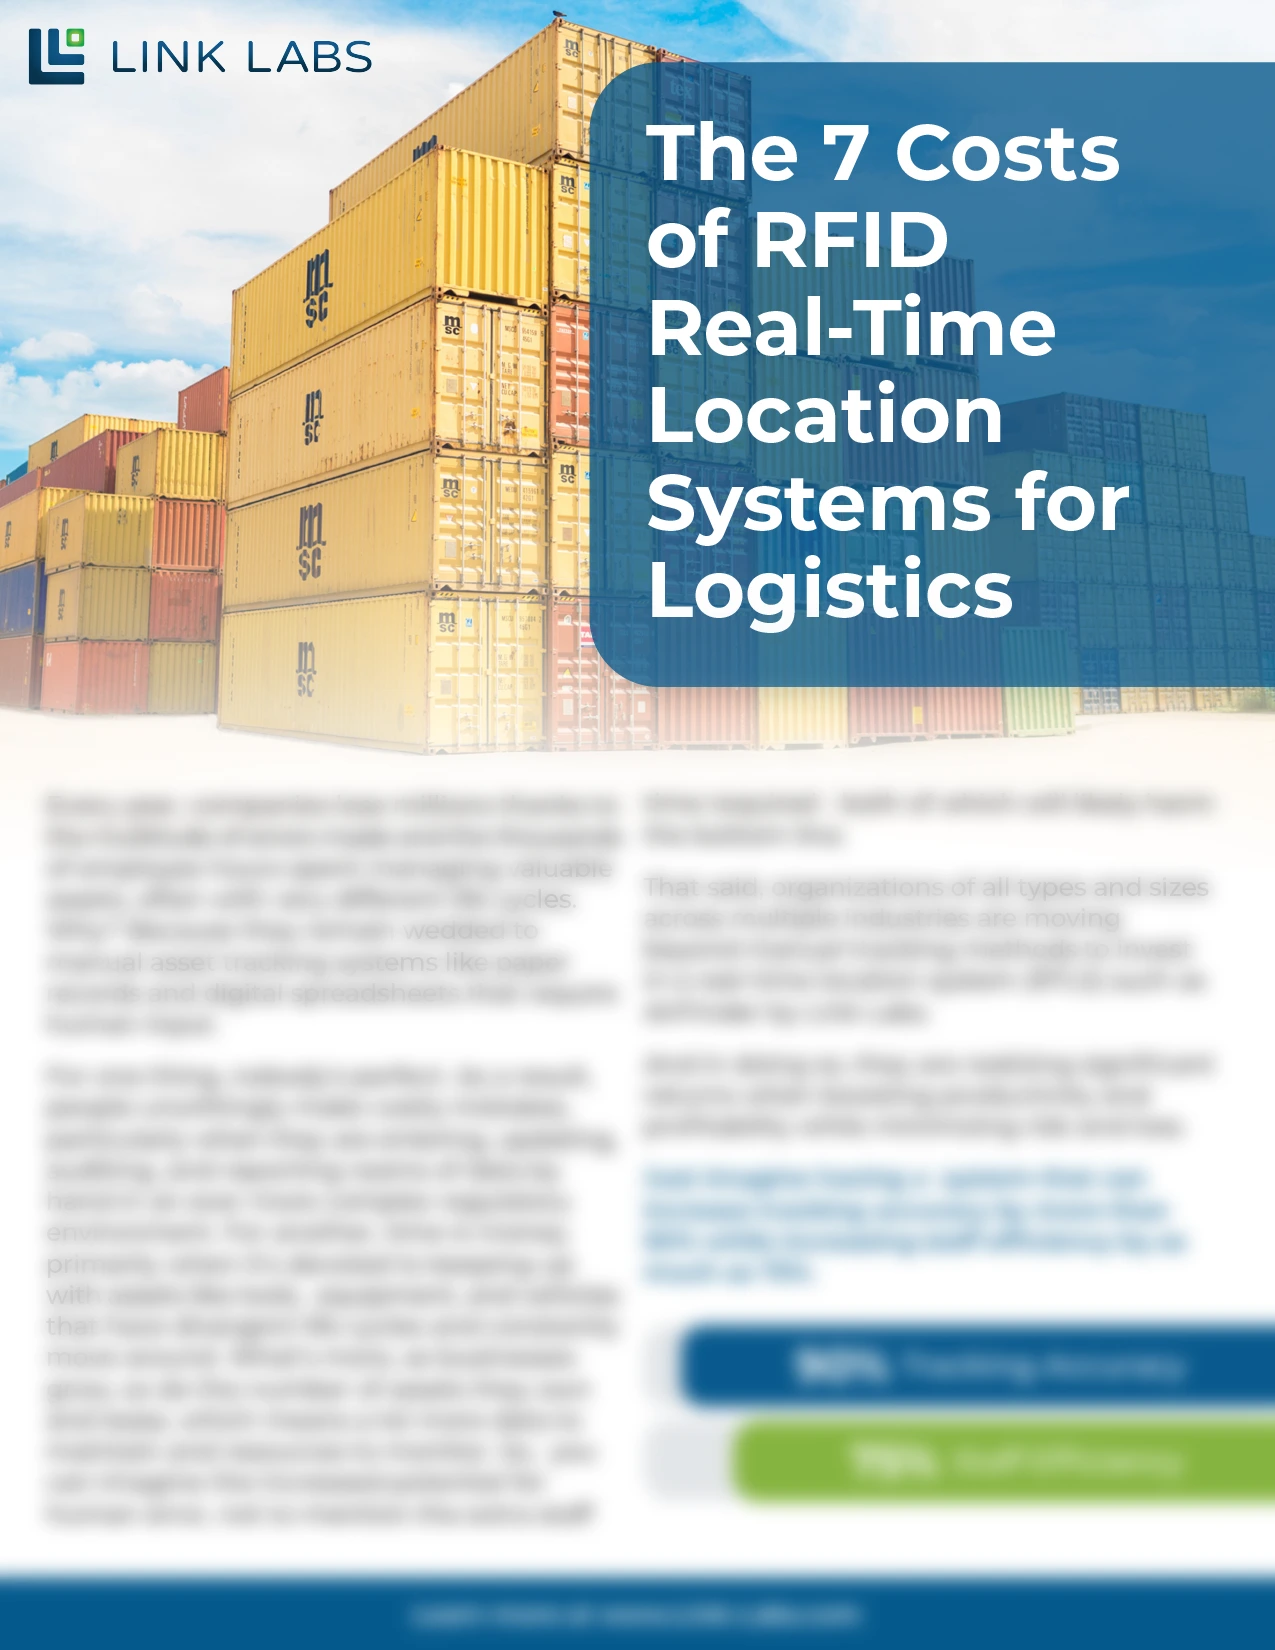 The 7 Costs of RFID Real-Time Location Systems for Logistics-01